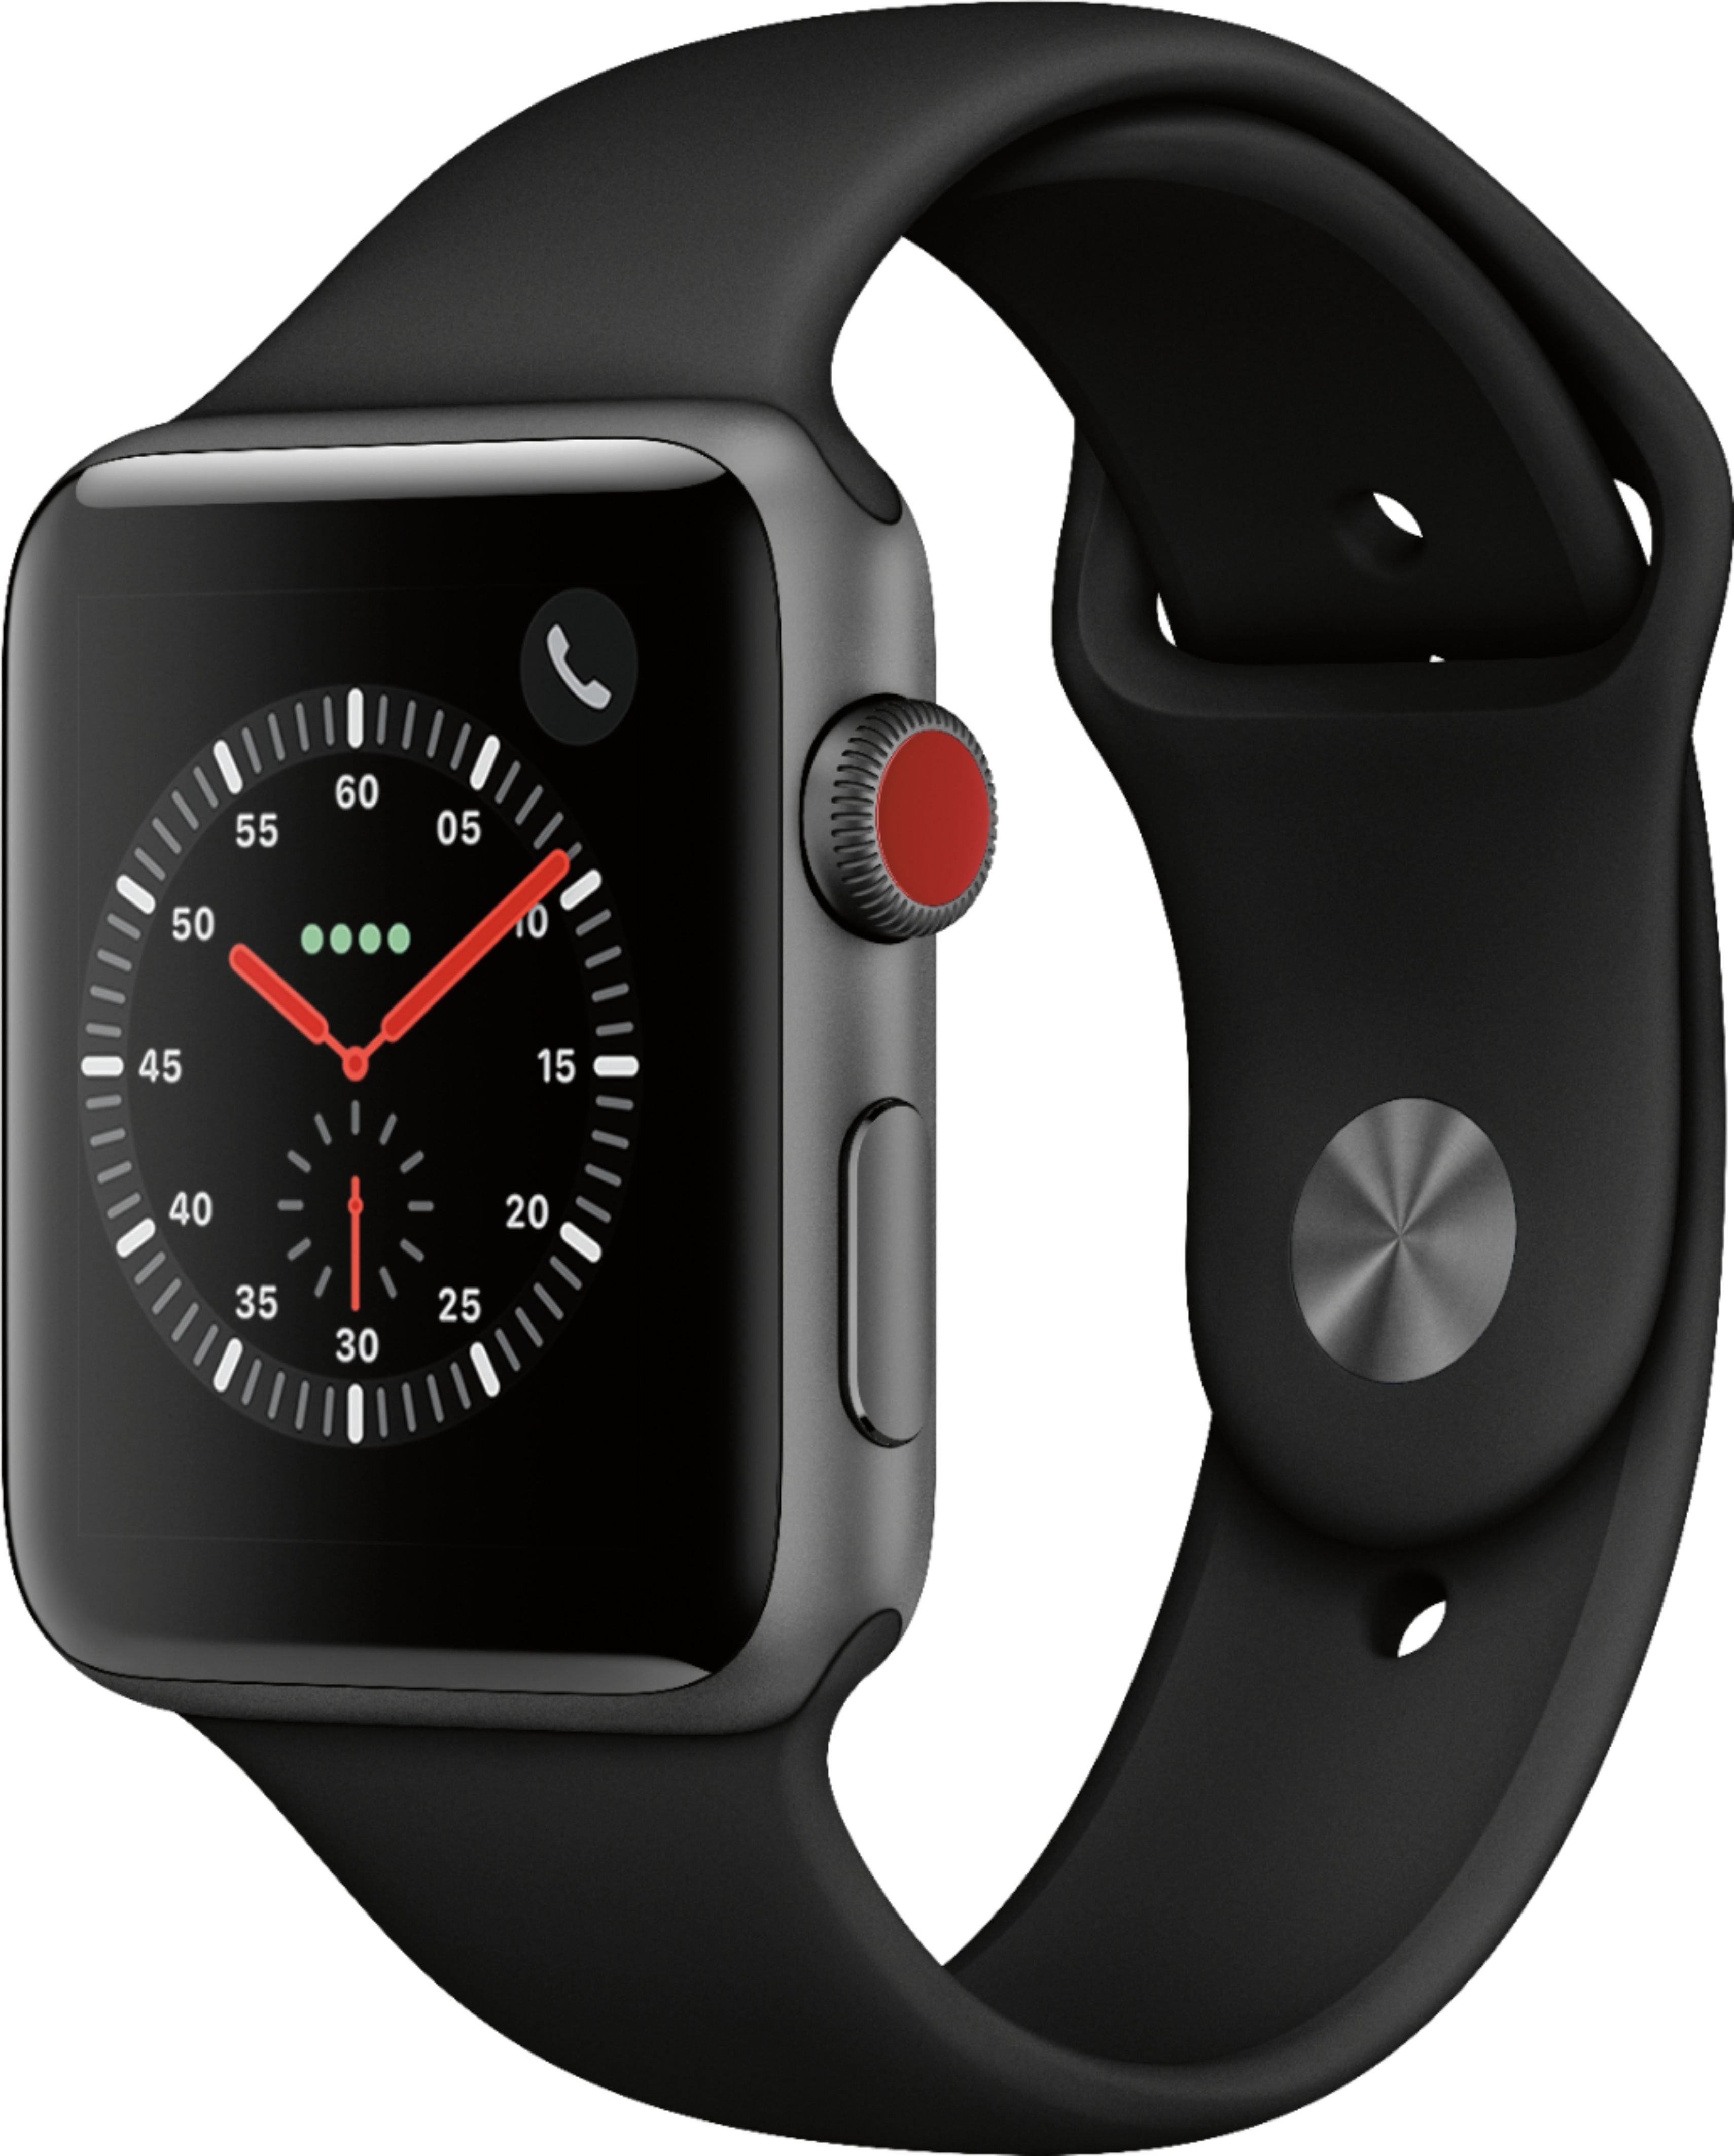 Apple Watch Series 3 (GPS + Cellular) 42mm Space Gray Aluminum Case with Black Sport Band - Space Gr | Best Buy U.S.